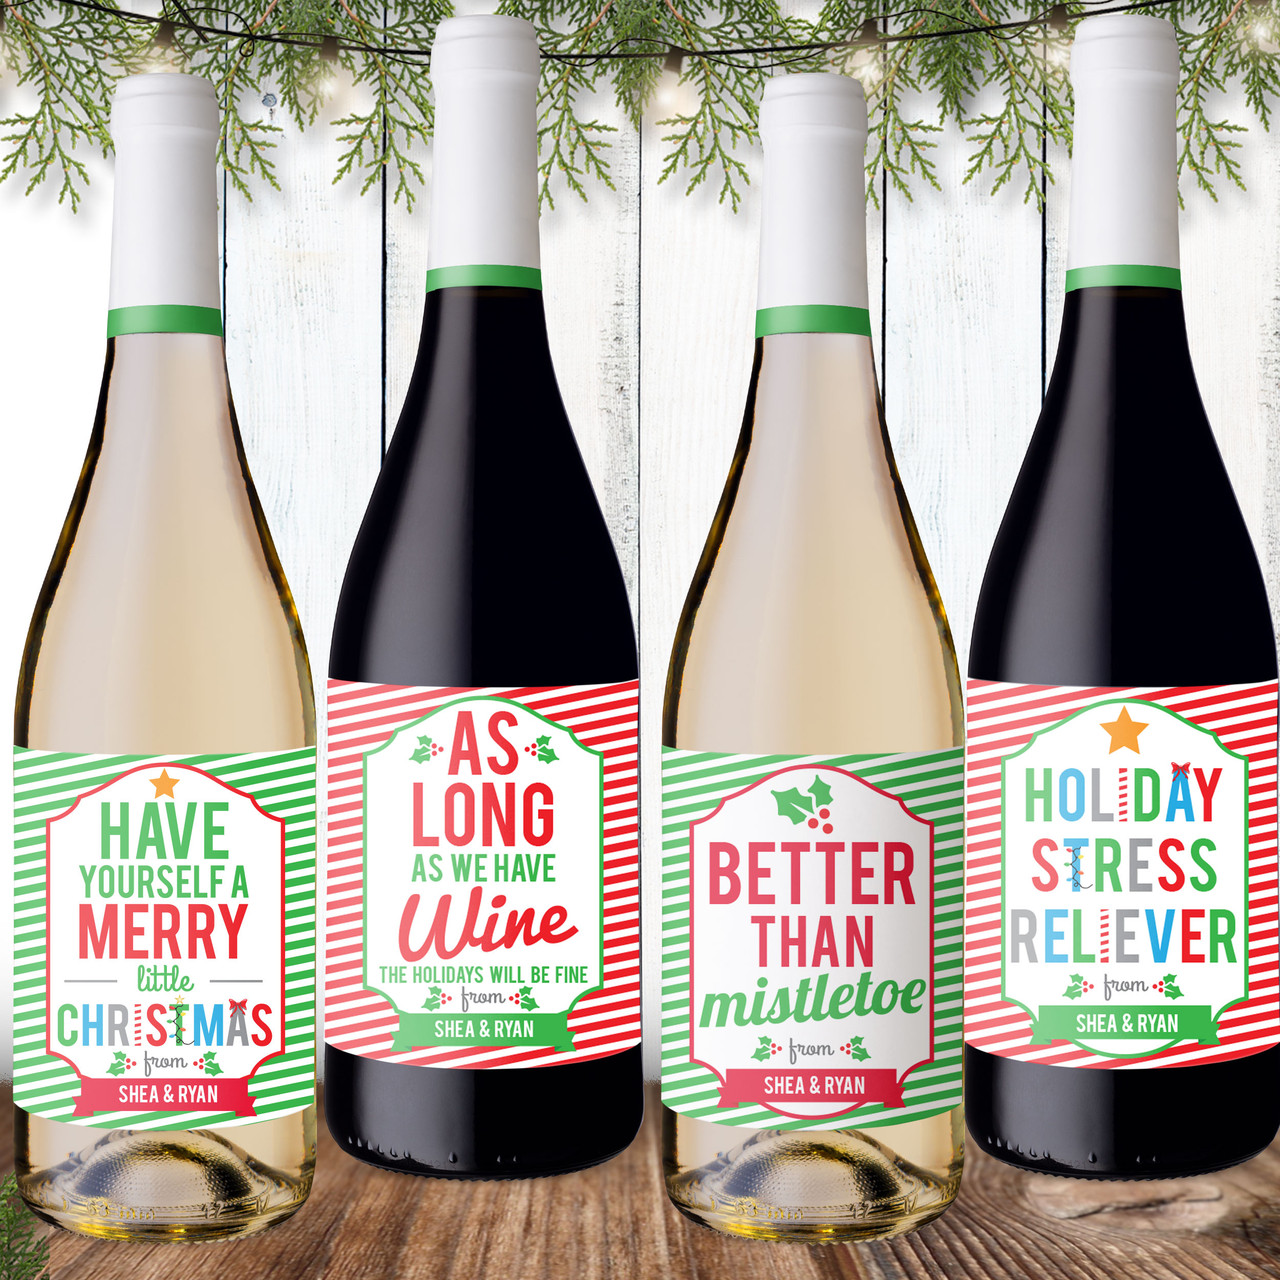 https://cdn11.bigcommerce.com/s-5grzuu6/images/stencil/1280x1280/products/3077/42842/Merry_Christmas_Personalized_Wine_Label_Stickers__49885.1631724193.jpg?c=2